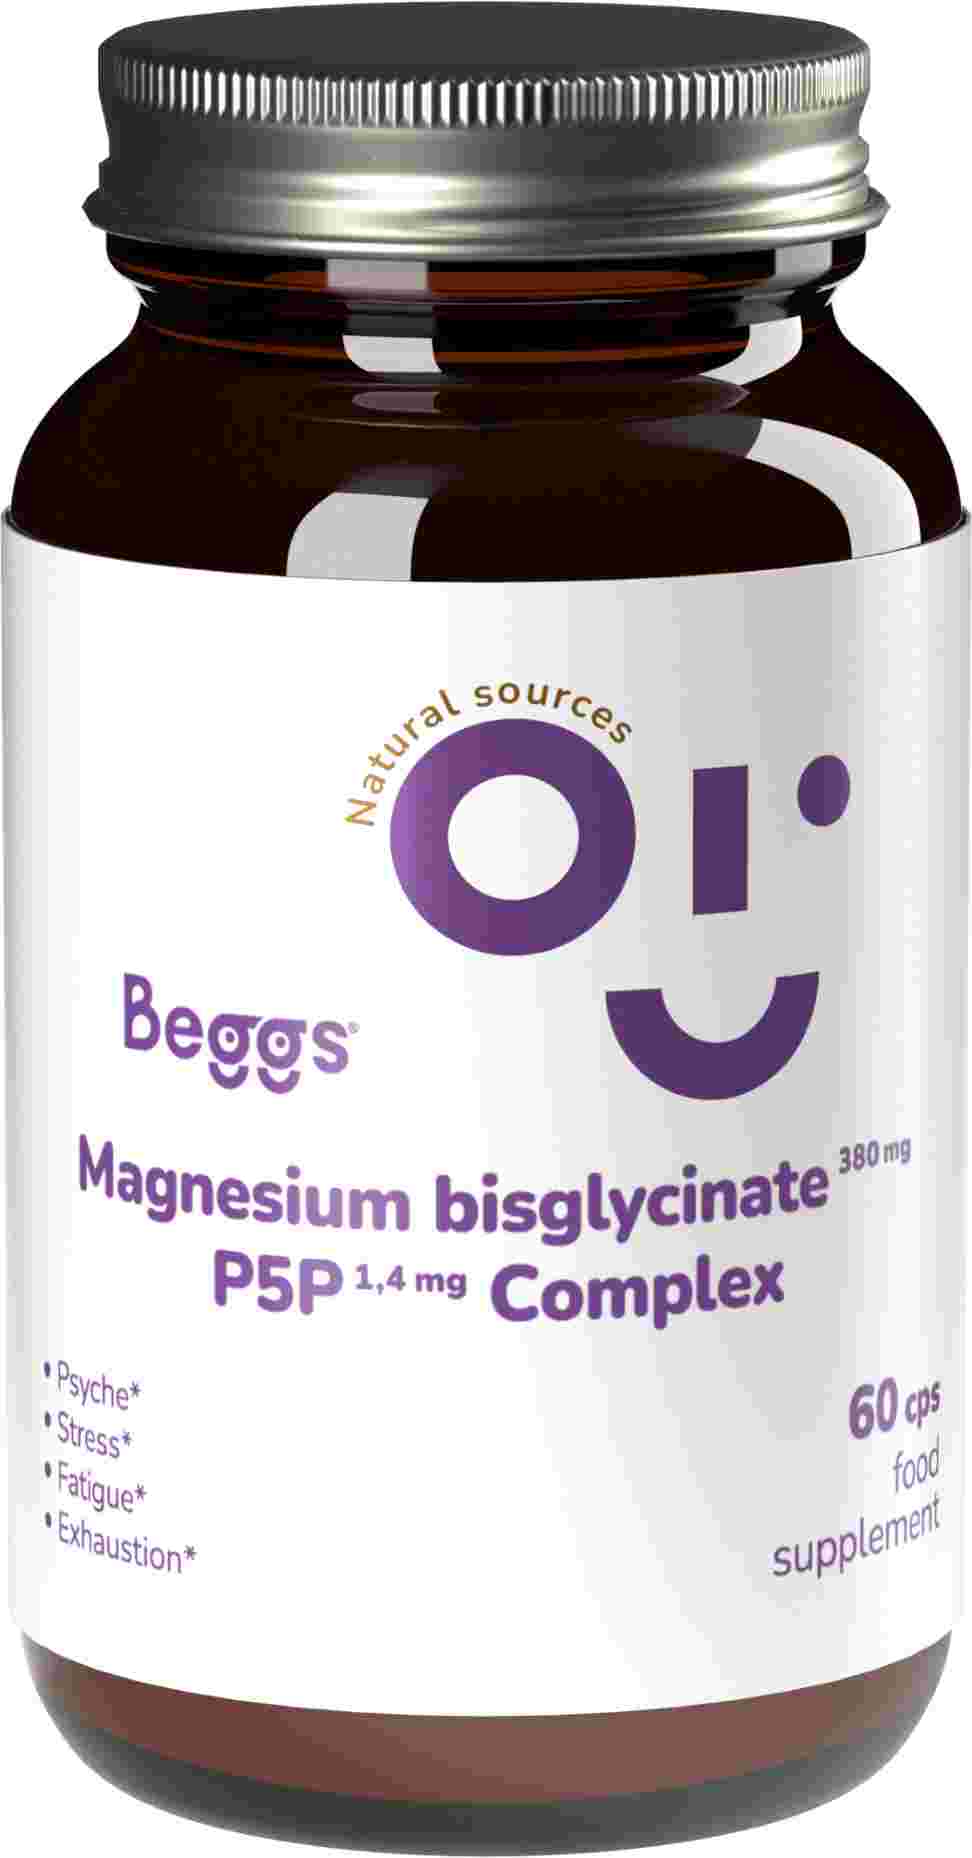 Beggs Magn bisglyc 380mgP5P COMPLEX 1,4 mg 60 cps